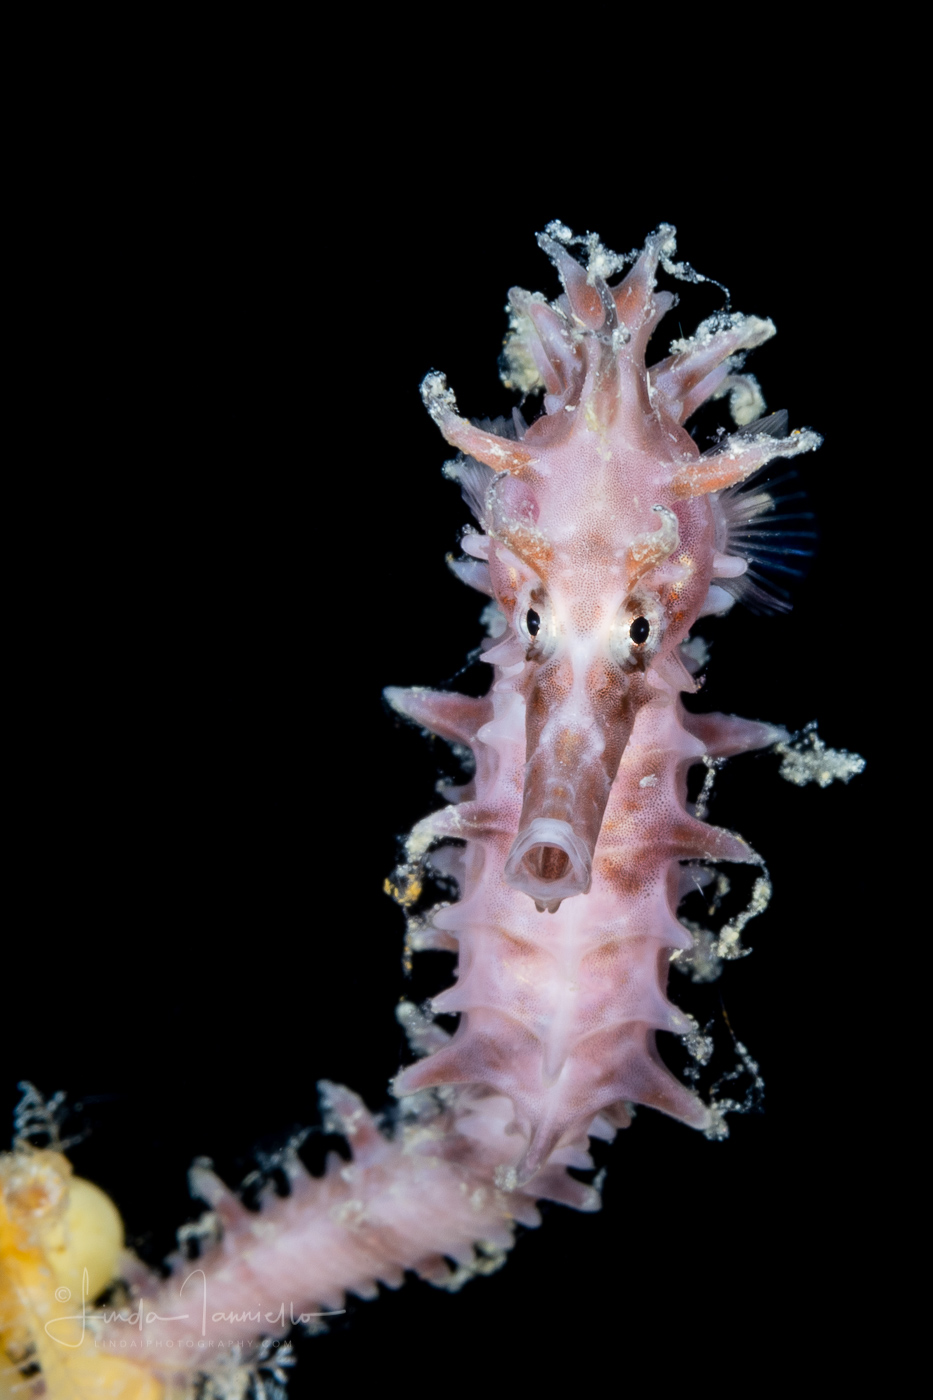 Seahorse - Lined - Syngnathidae Family - Hippocampus erectus